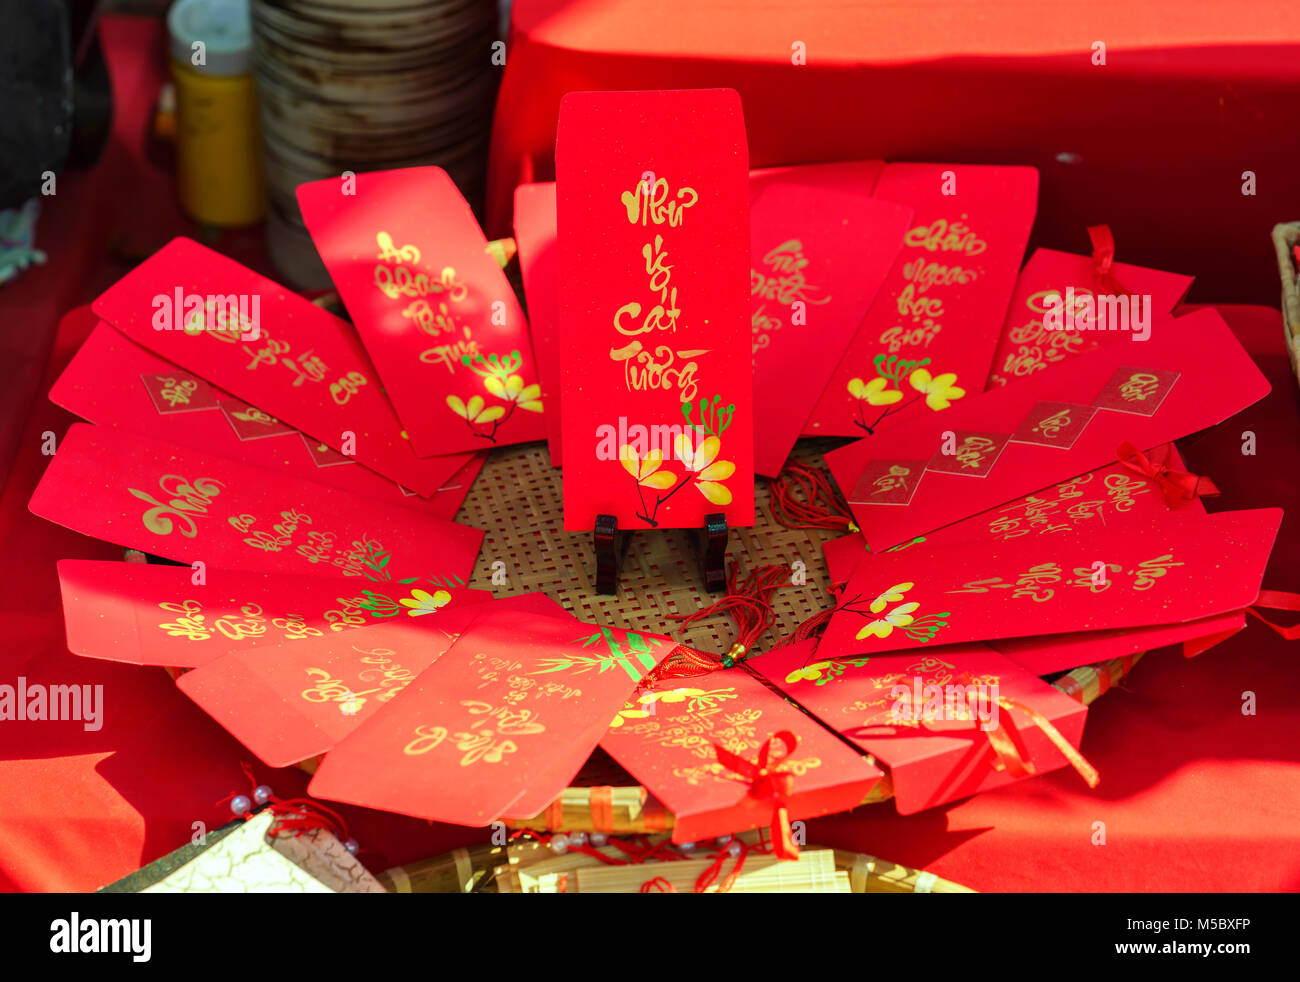 Red Envelopes Lunar New Year Calligraphy Decorated Text Merit Fortune –  Stock Editorial Photo © huythoai1978@gmail.com #183490518